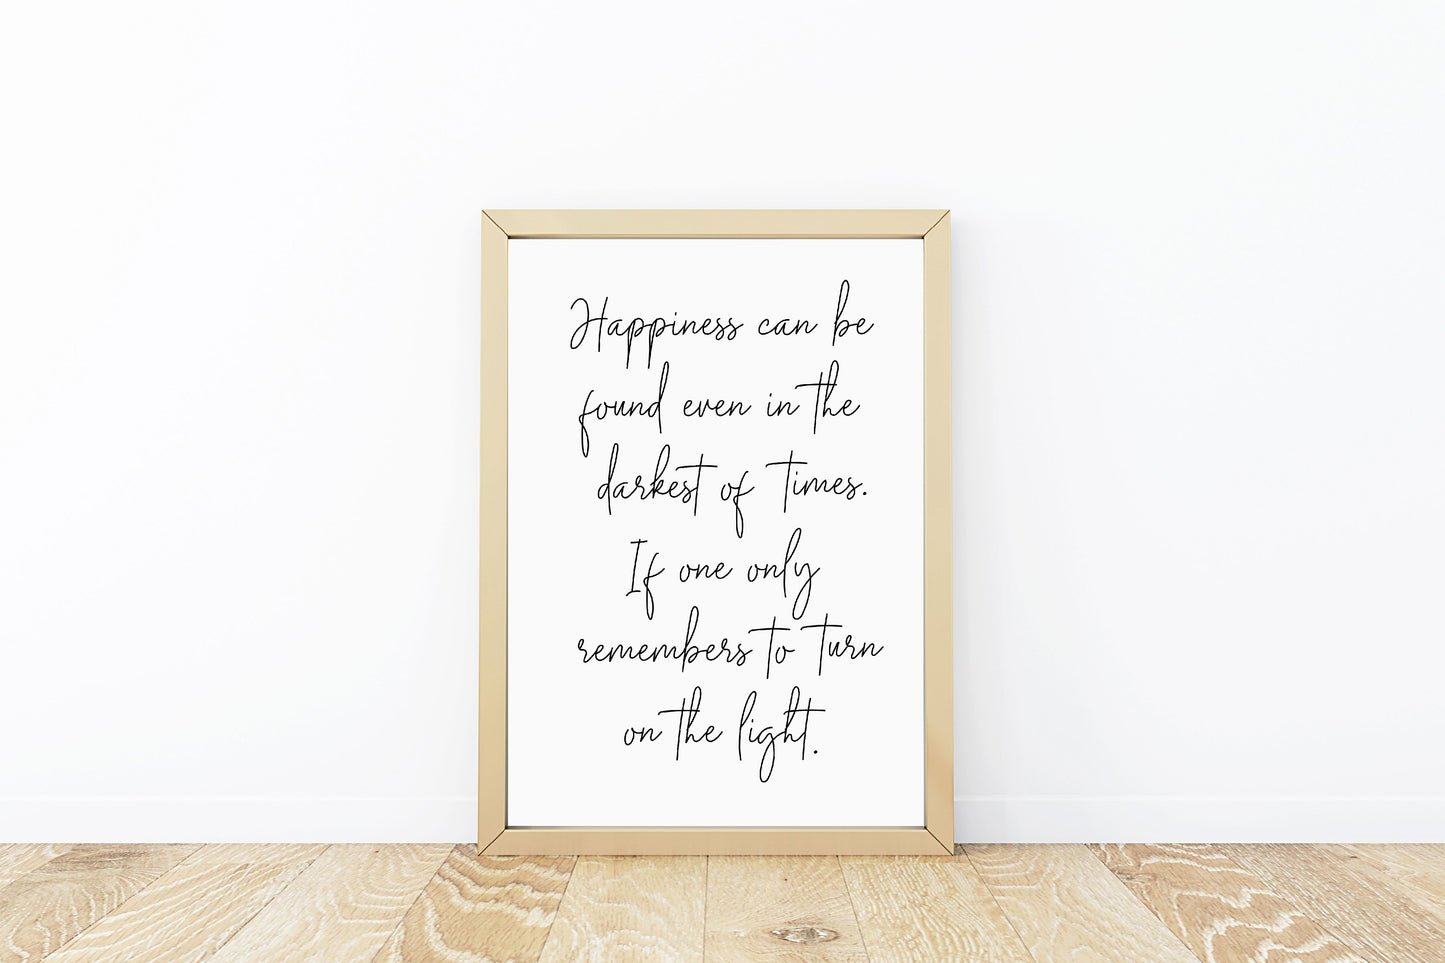 Quote Print | Happiness Can Be Found Even in The Darkest Of Times, If One Only Remembers To Turn On The Light | Inspirational Print